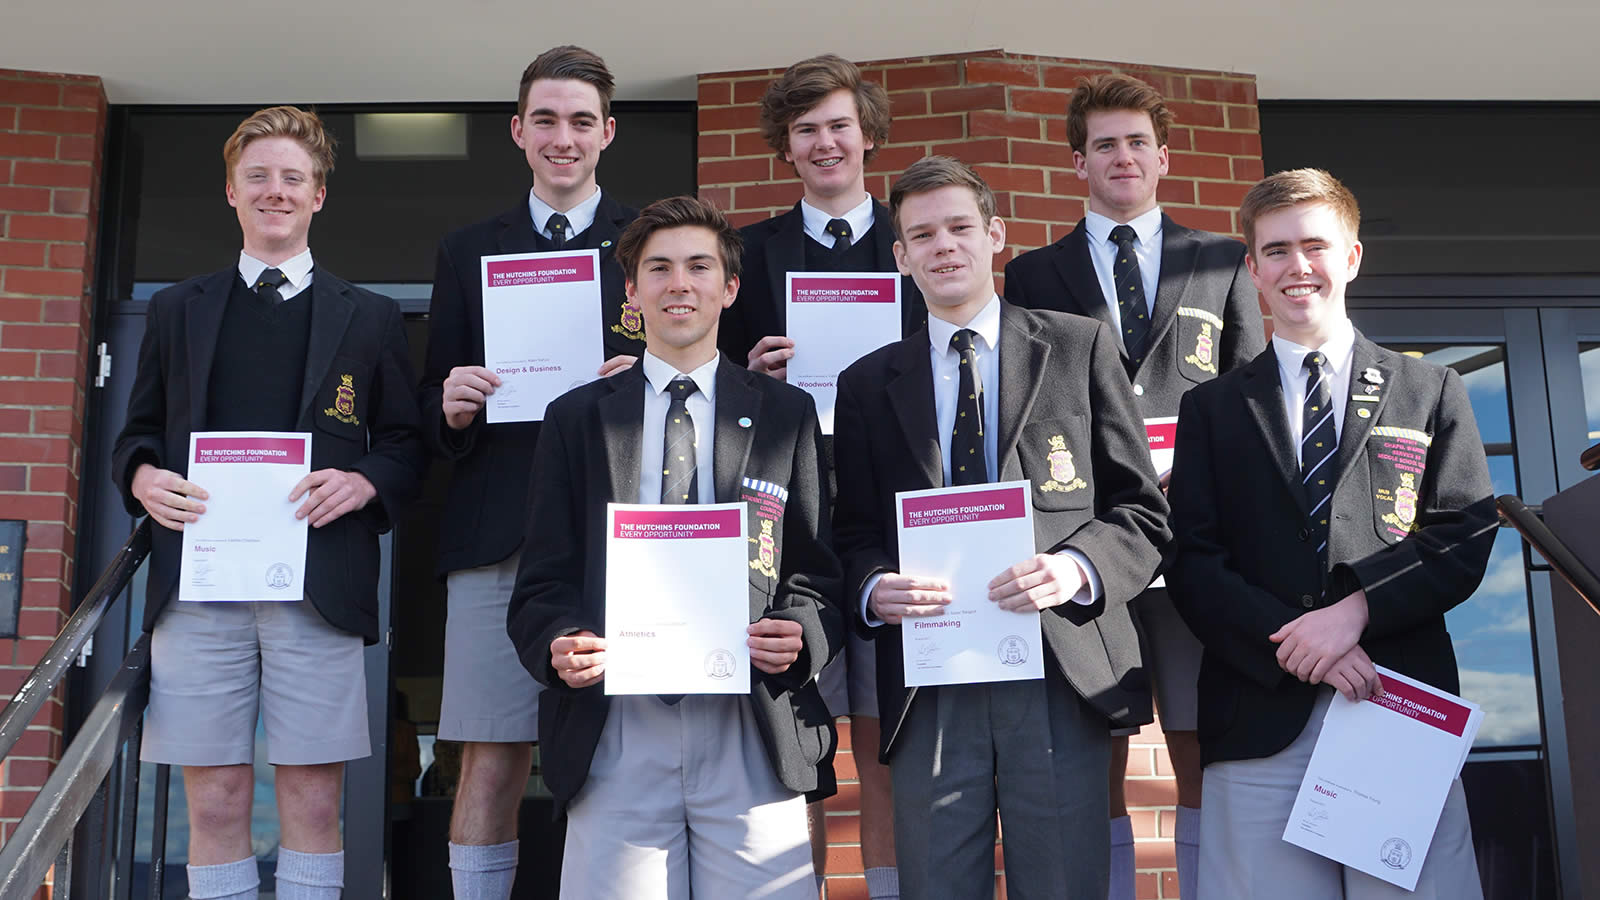 Back row L–R Lachlan Chambers, Adam Nyhuis, Caleb Oakes and Samuel King. Front row L–R Harvey Chilcott, Isaac Sargent and Thomas Young.